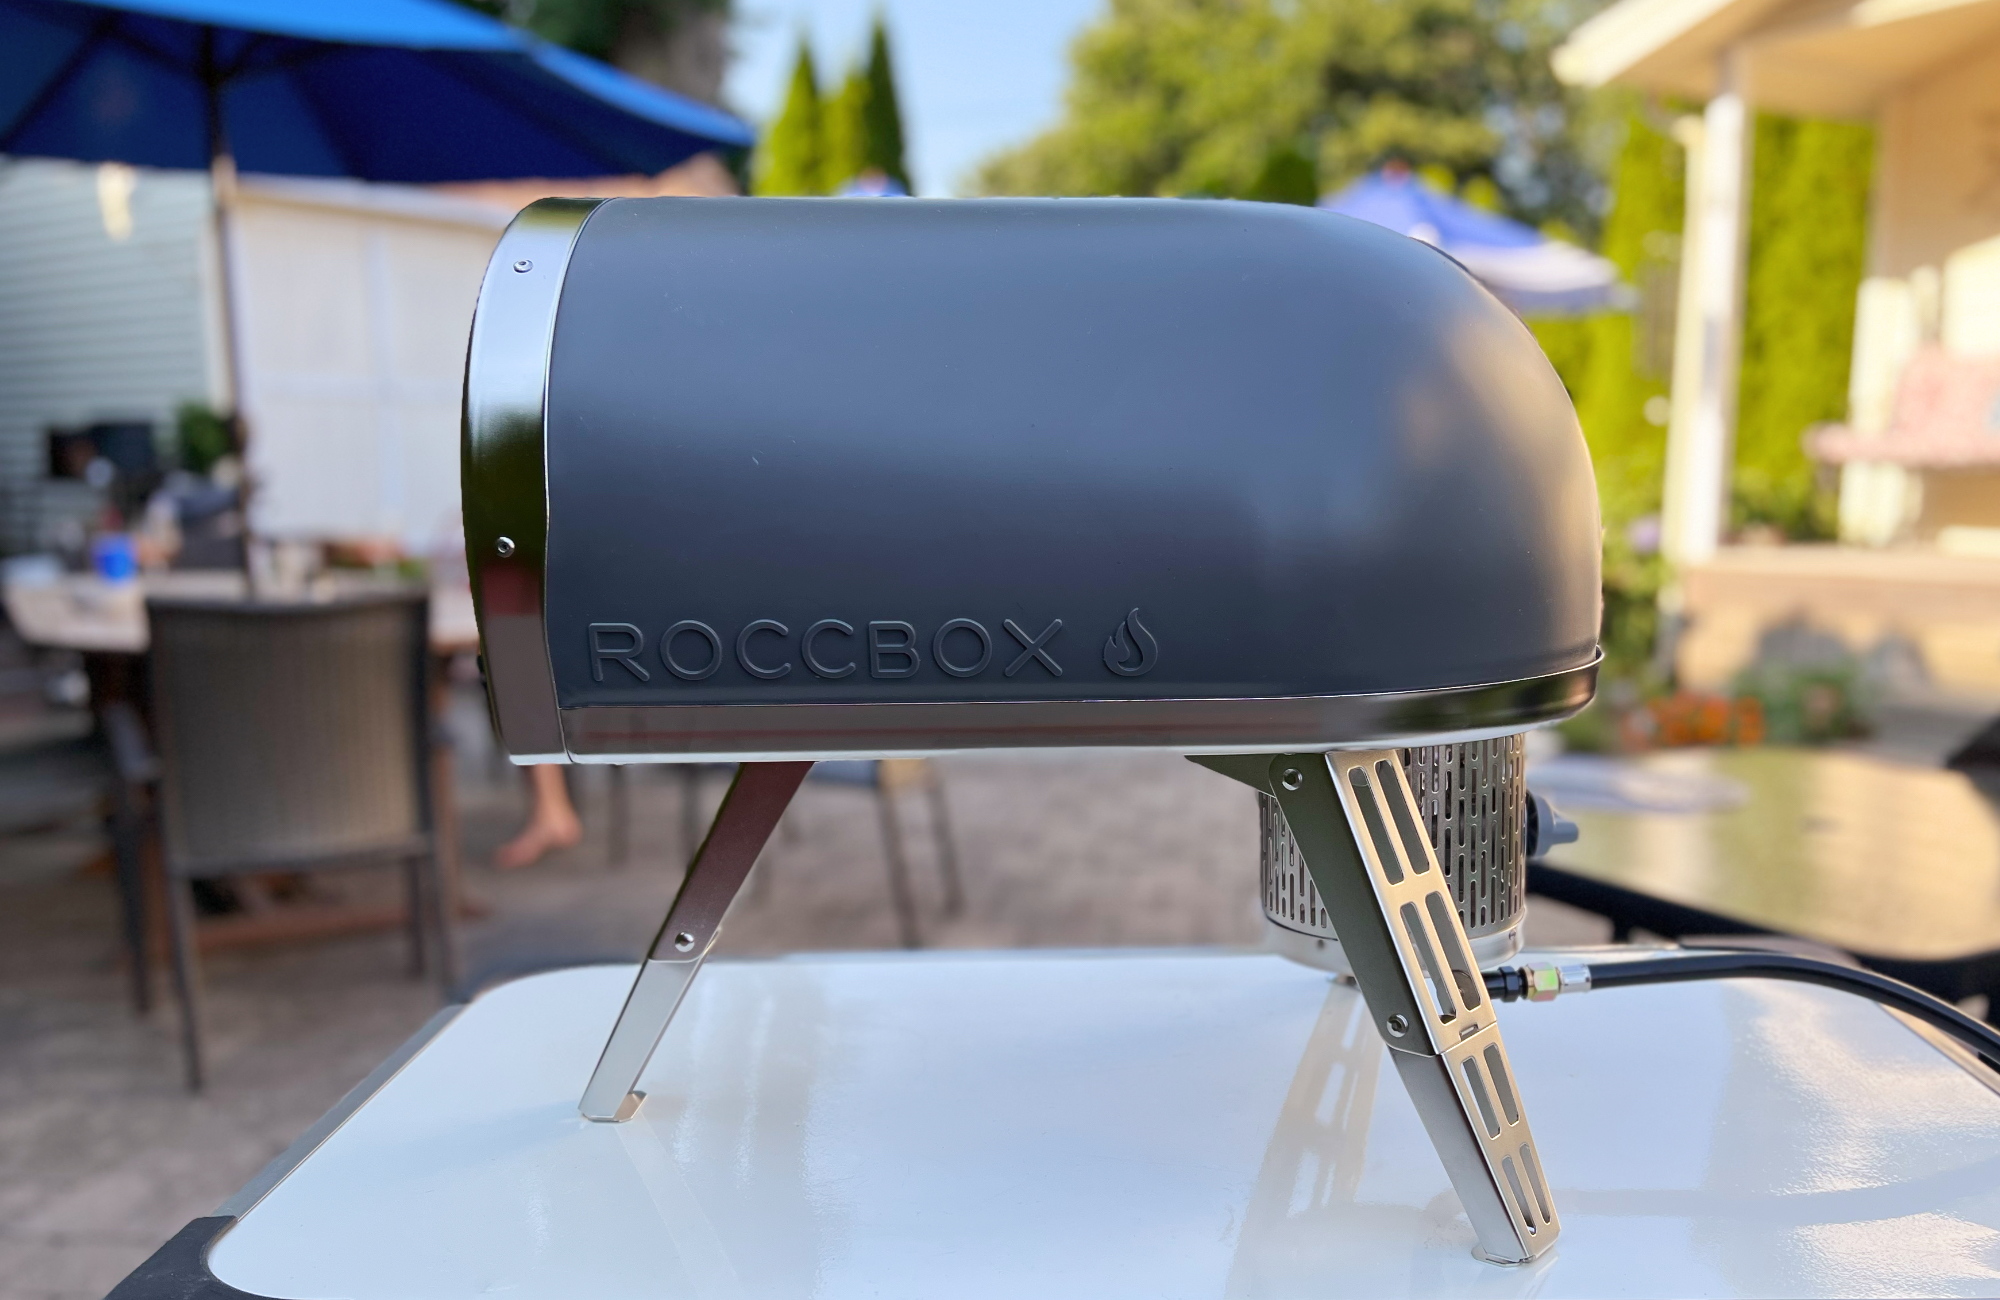 Snag a saucy Prime Day deal on the Gozney’s Roccbox pizza oven